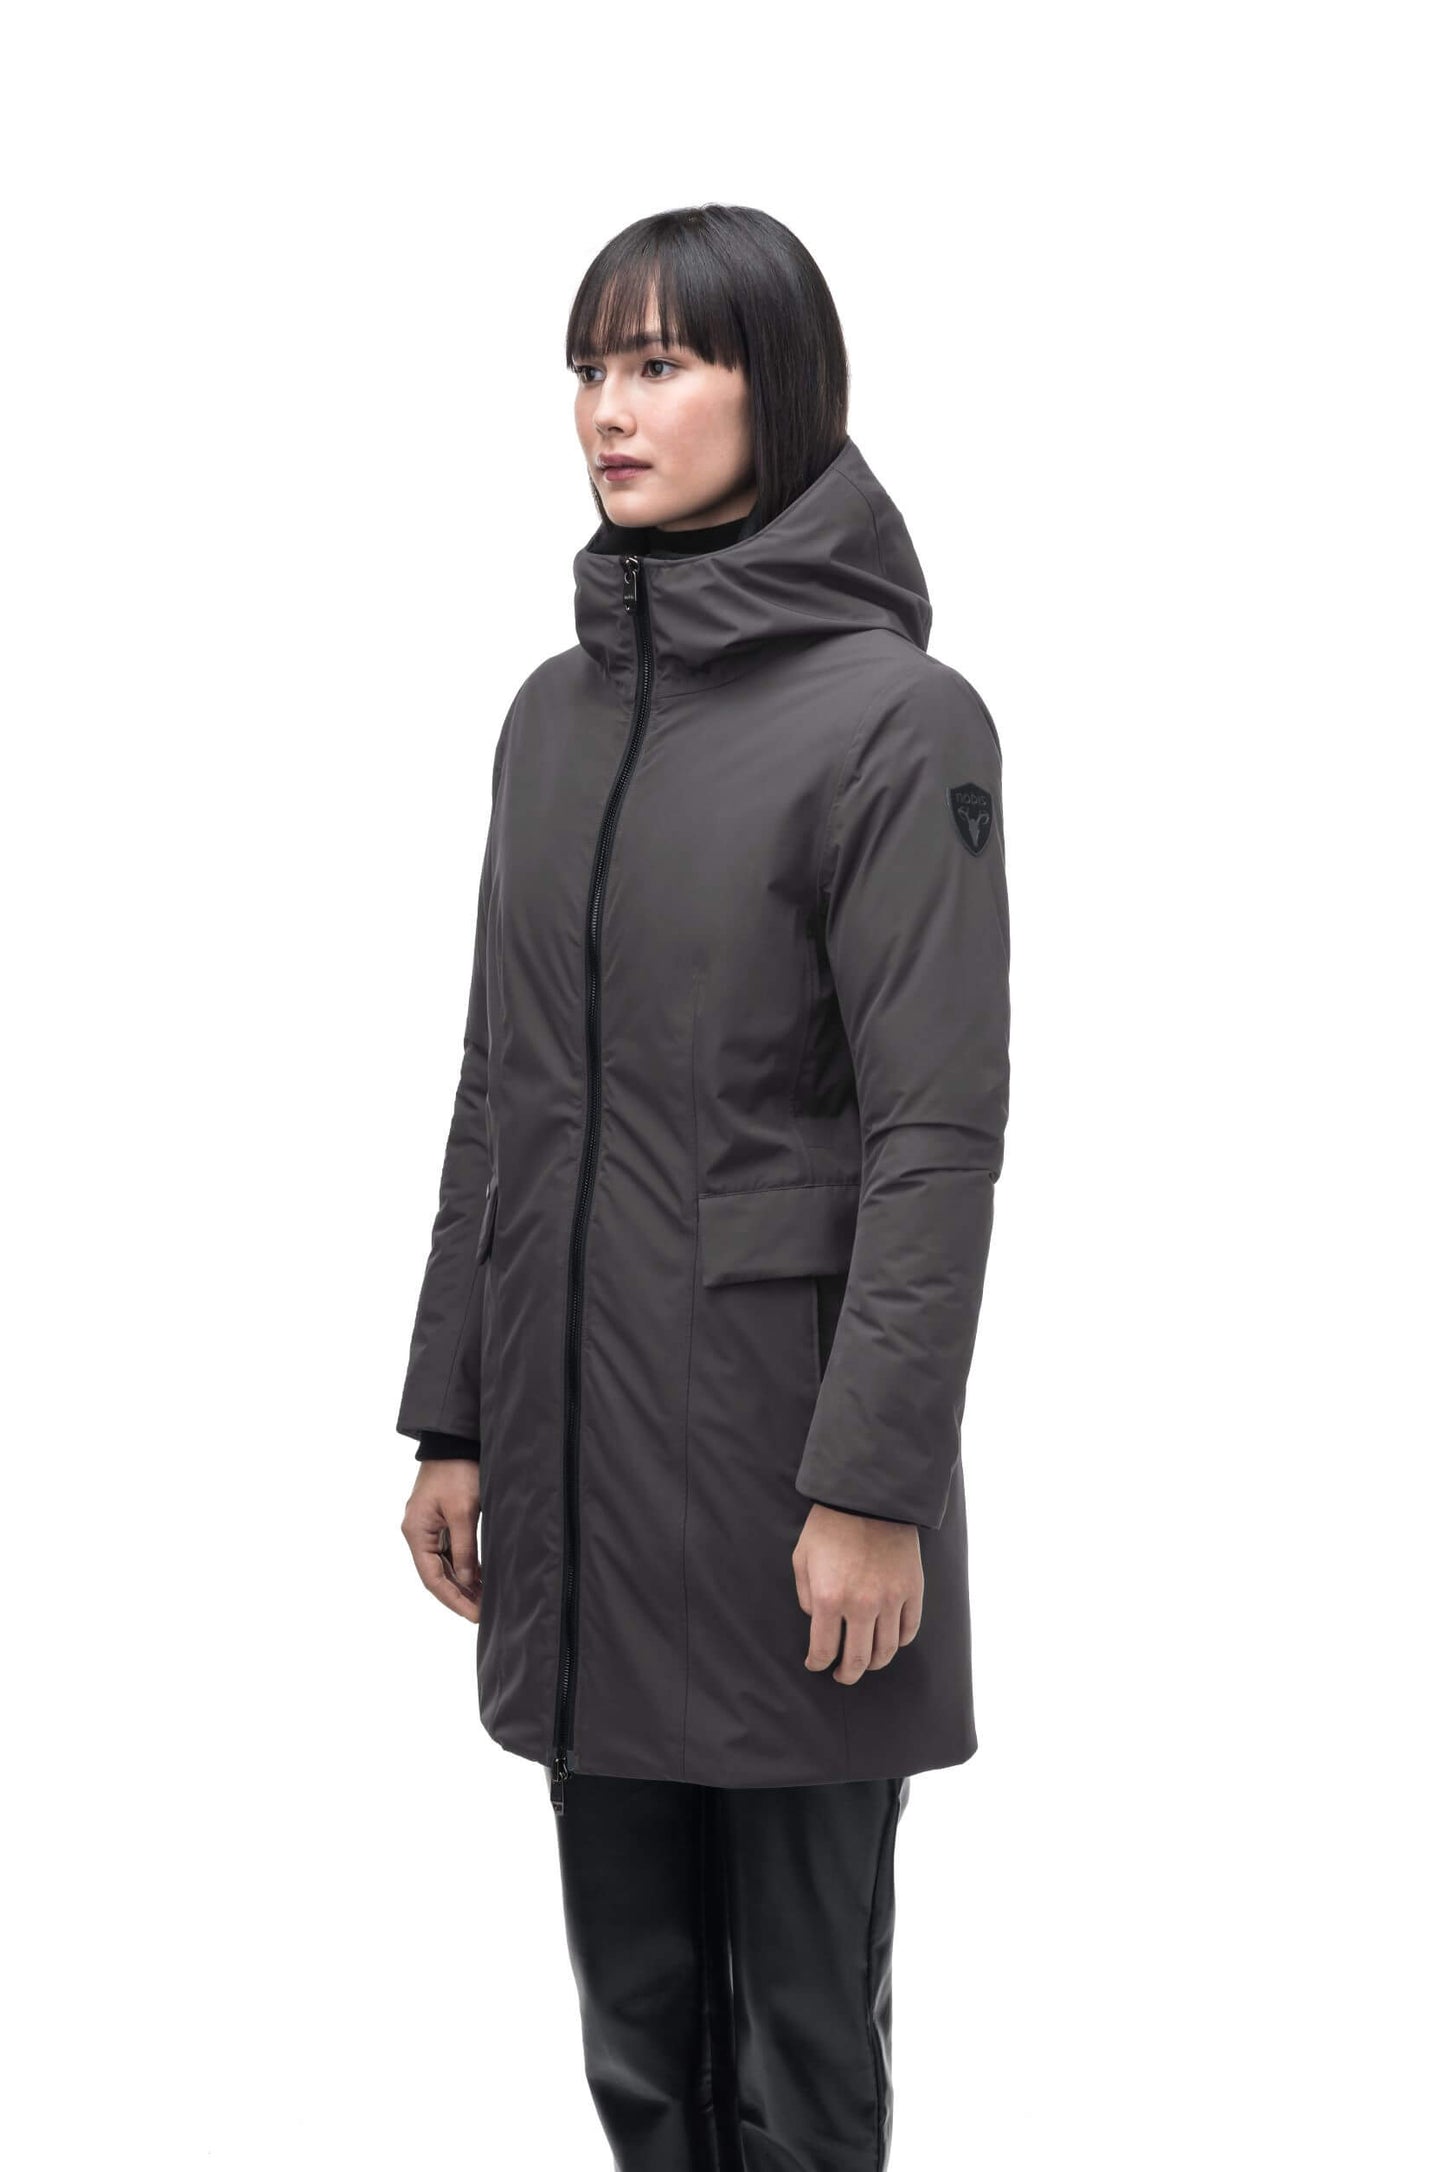 Romeda Furless Ladies Mid Thigh Parka in thigh length, Canadian duck down insulation, non-removable hood, and two-way front zipper, in Steel Grey